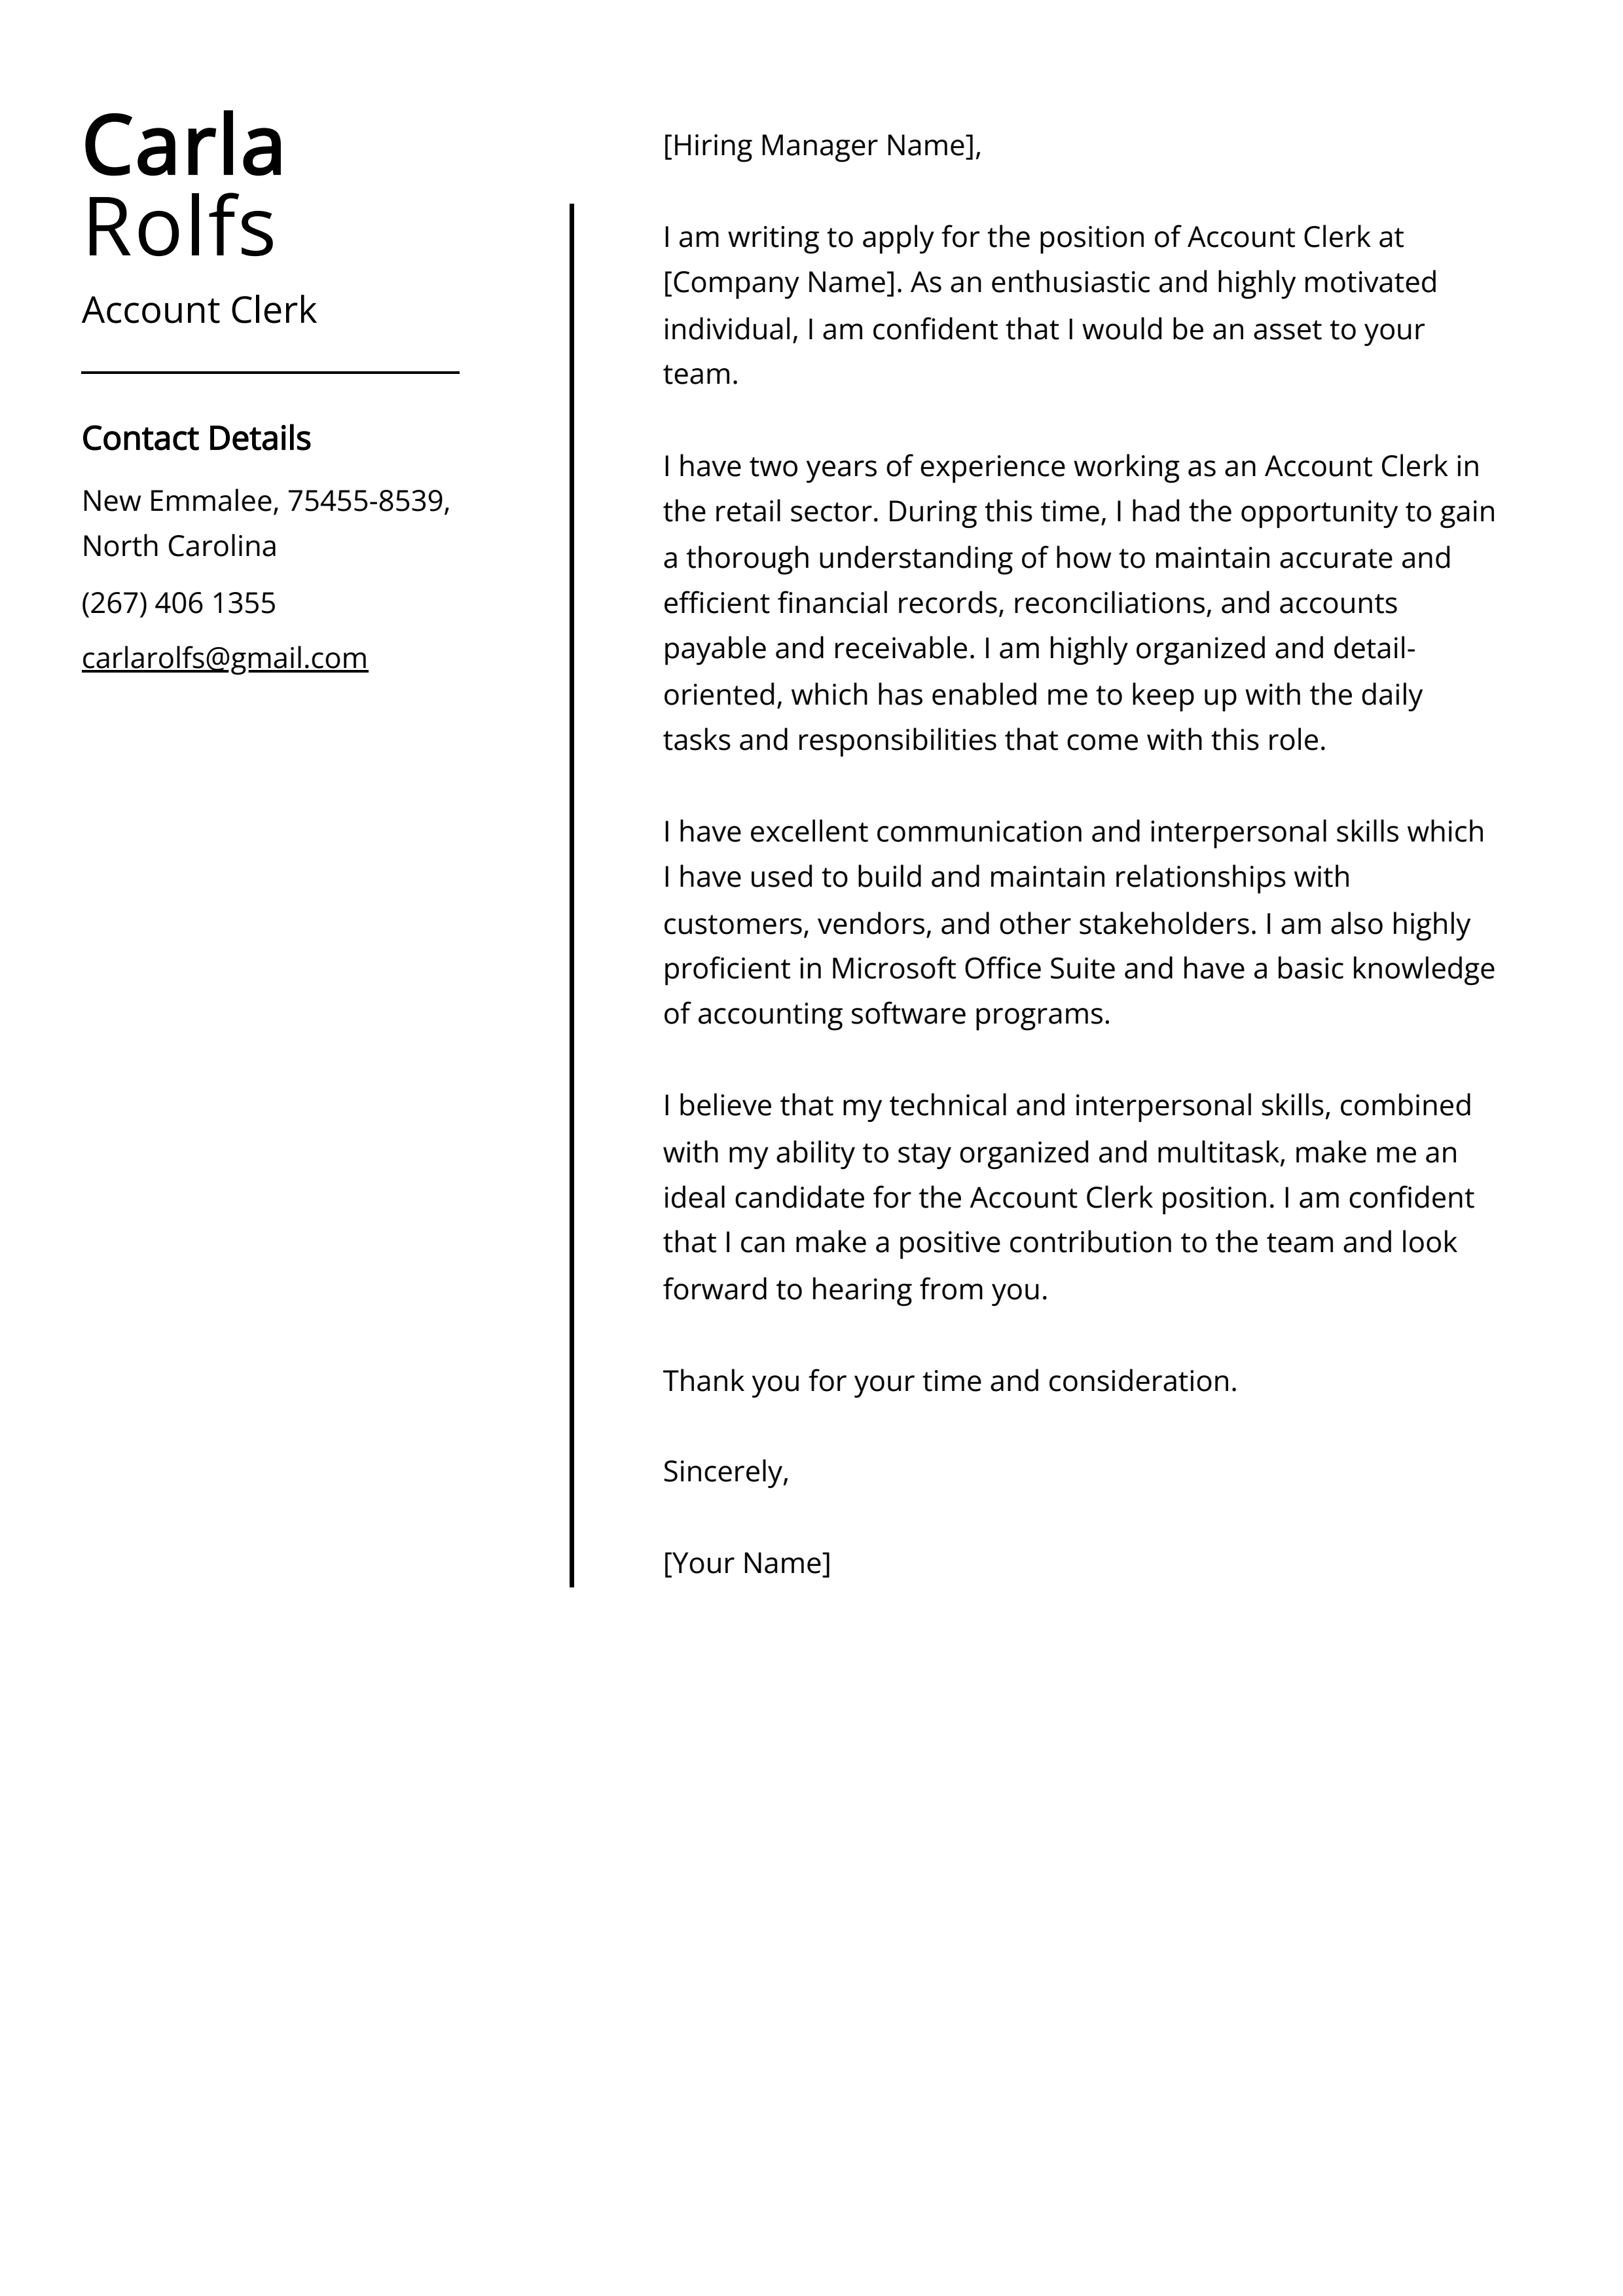 Account Clerk Cover Letter Example